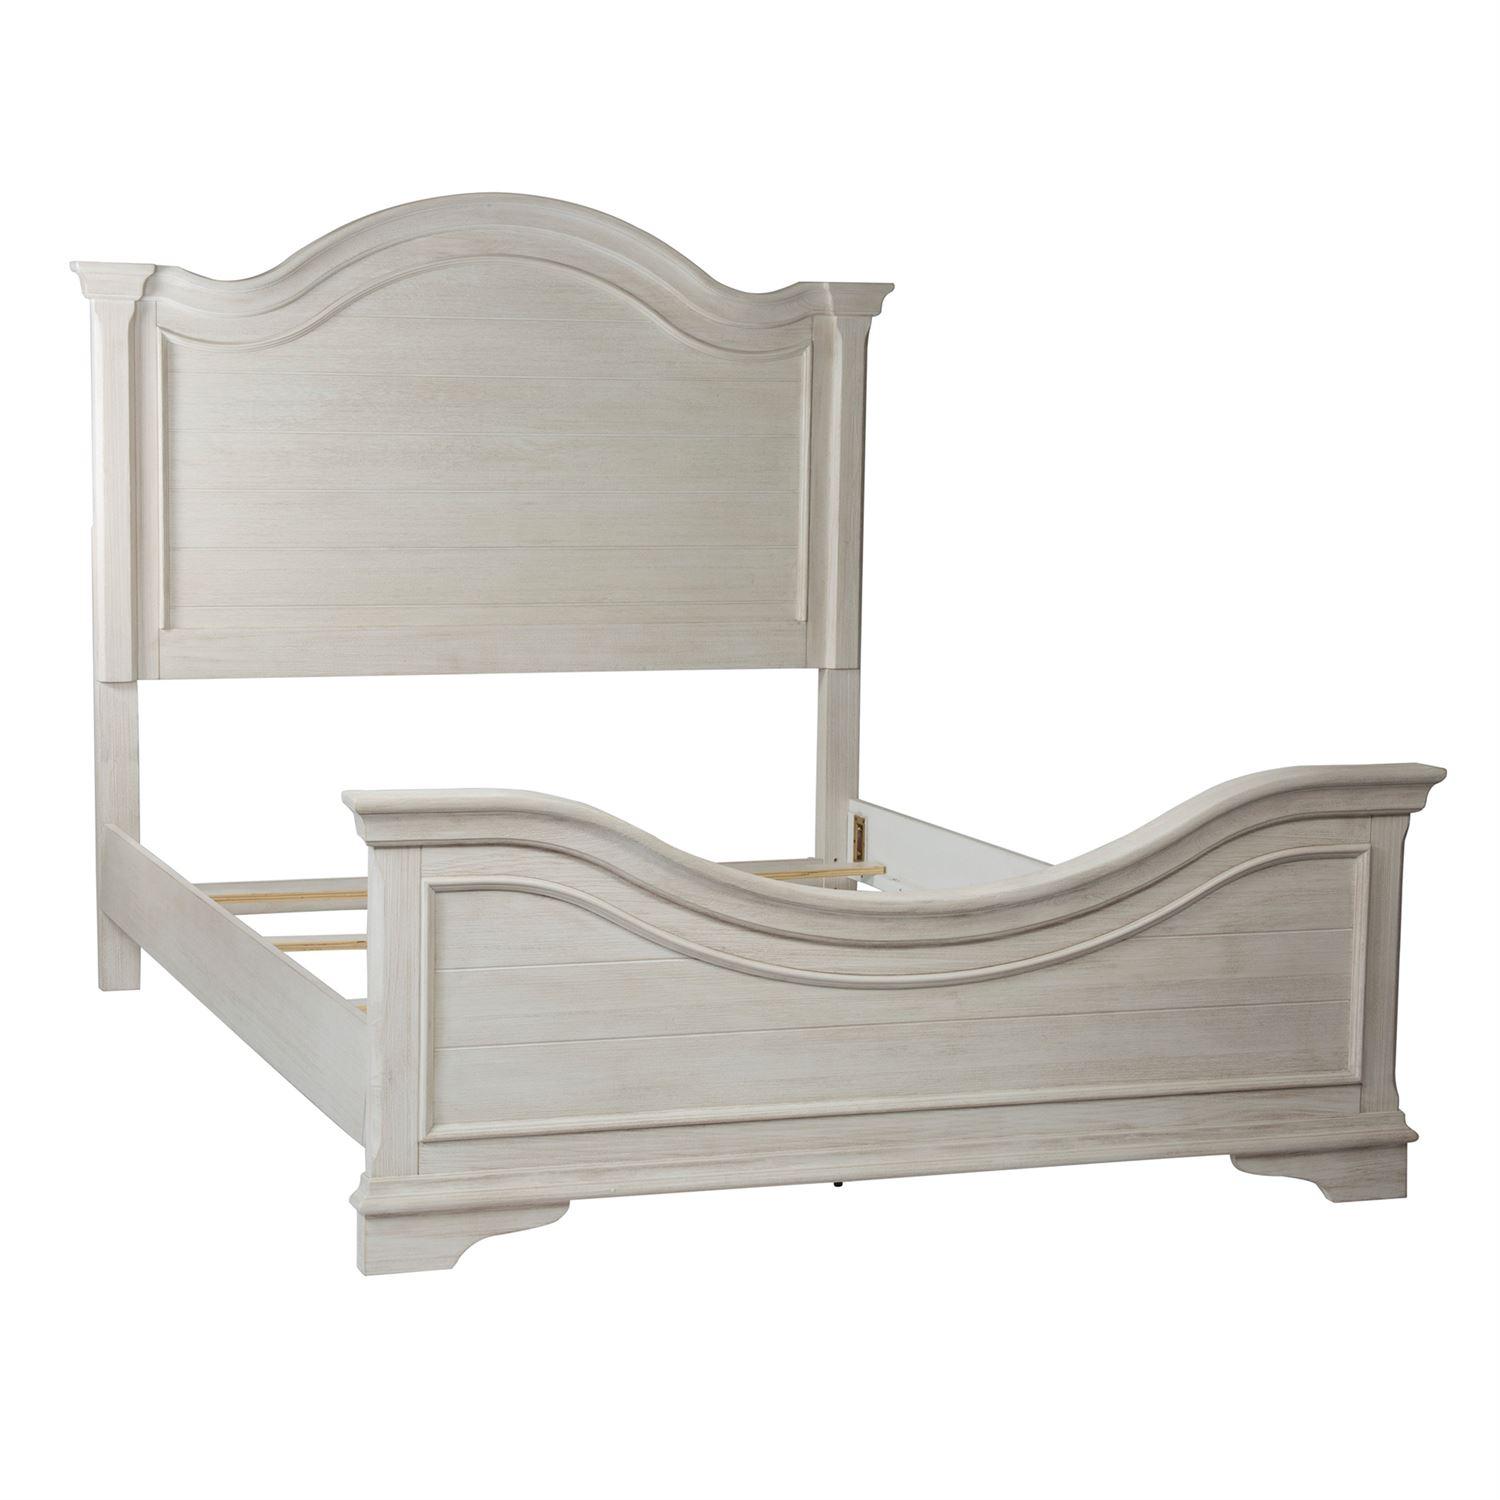 

    
Liberty Furniture Bayside 249-BR-CPB Panel Bed White 249-BR-CPB
